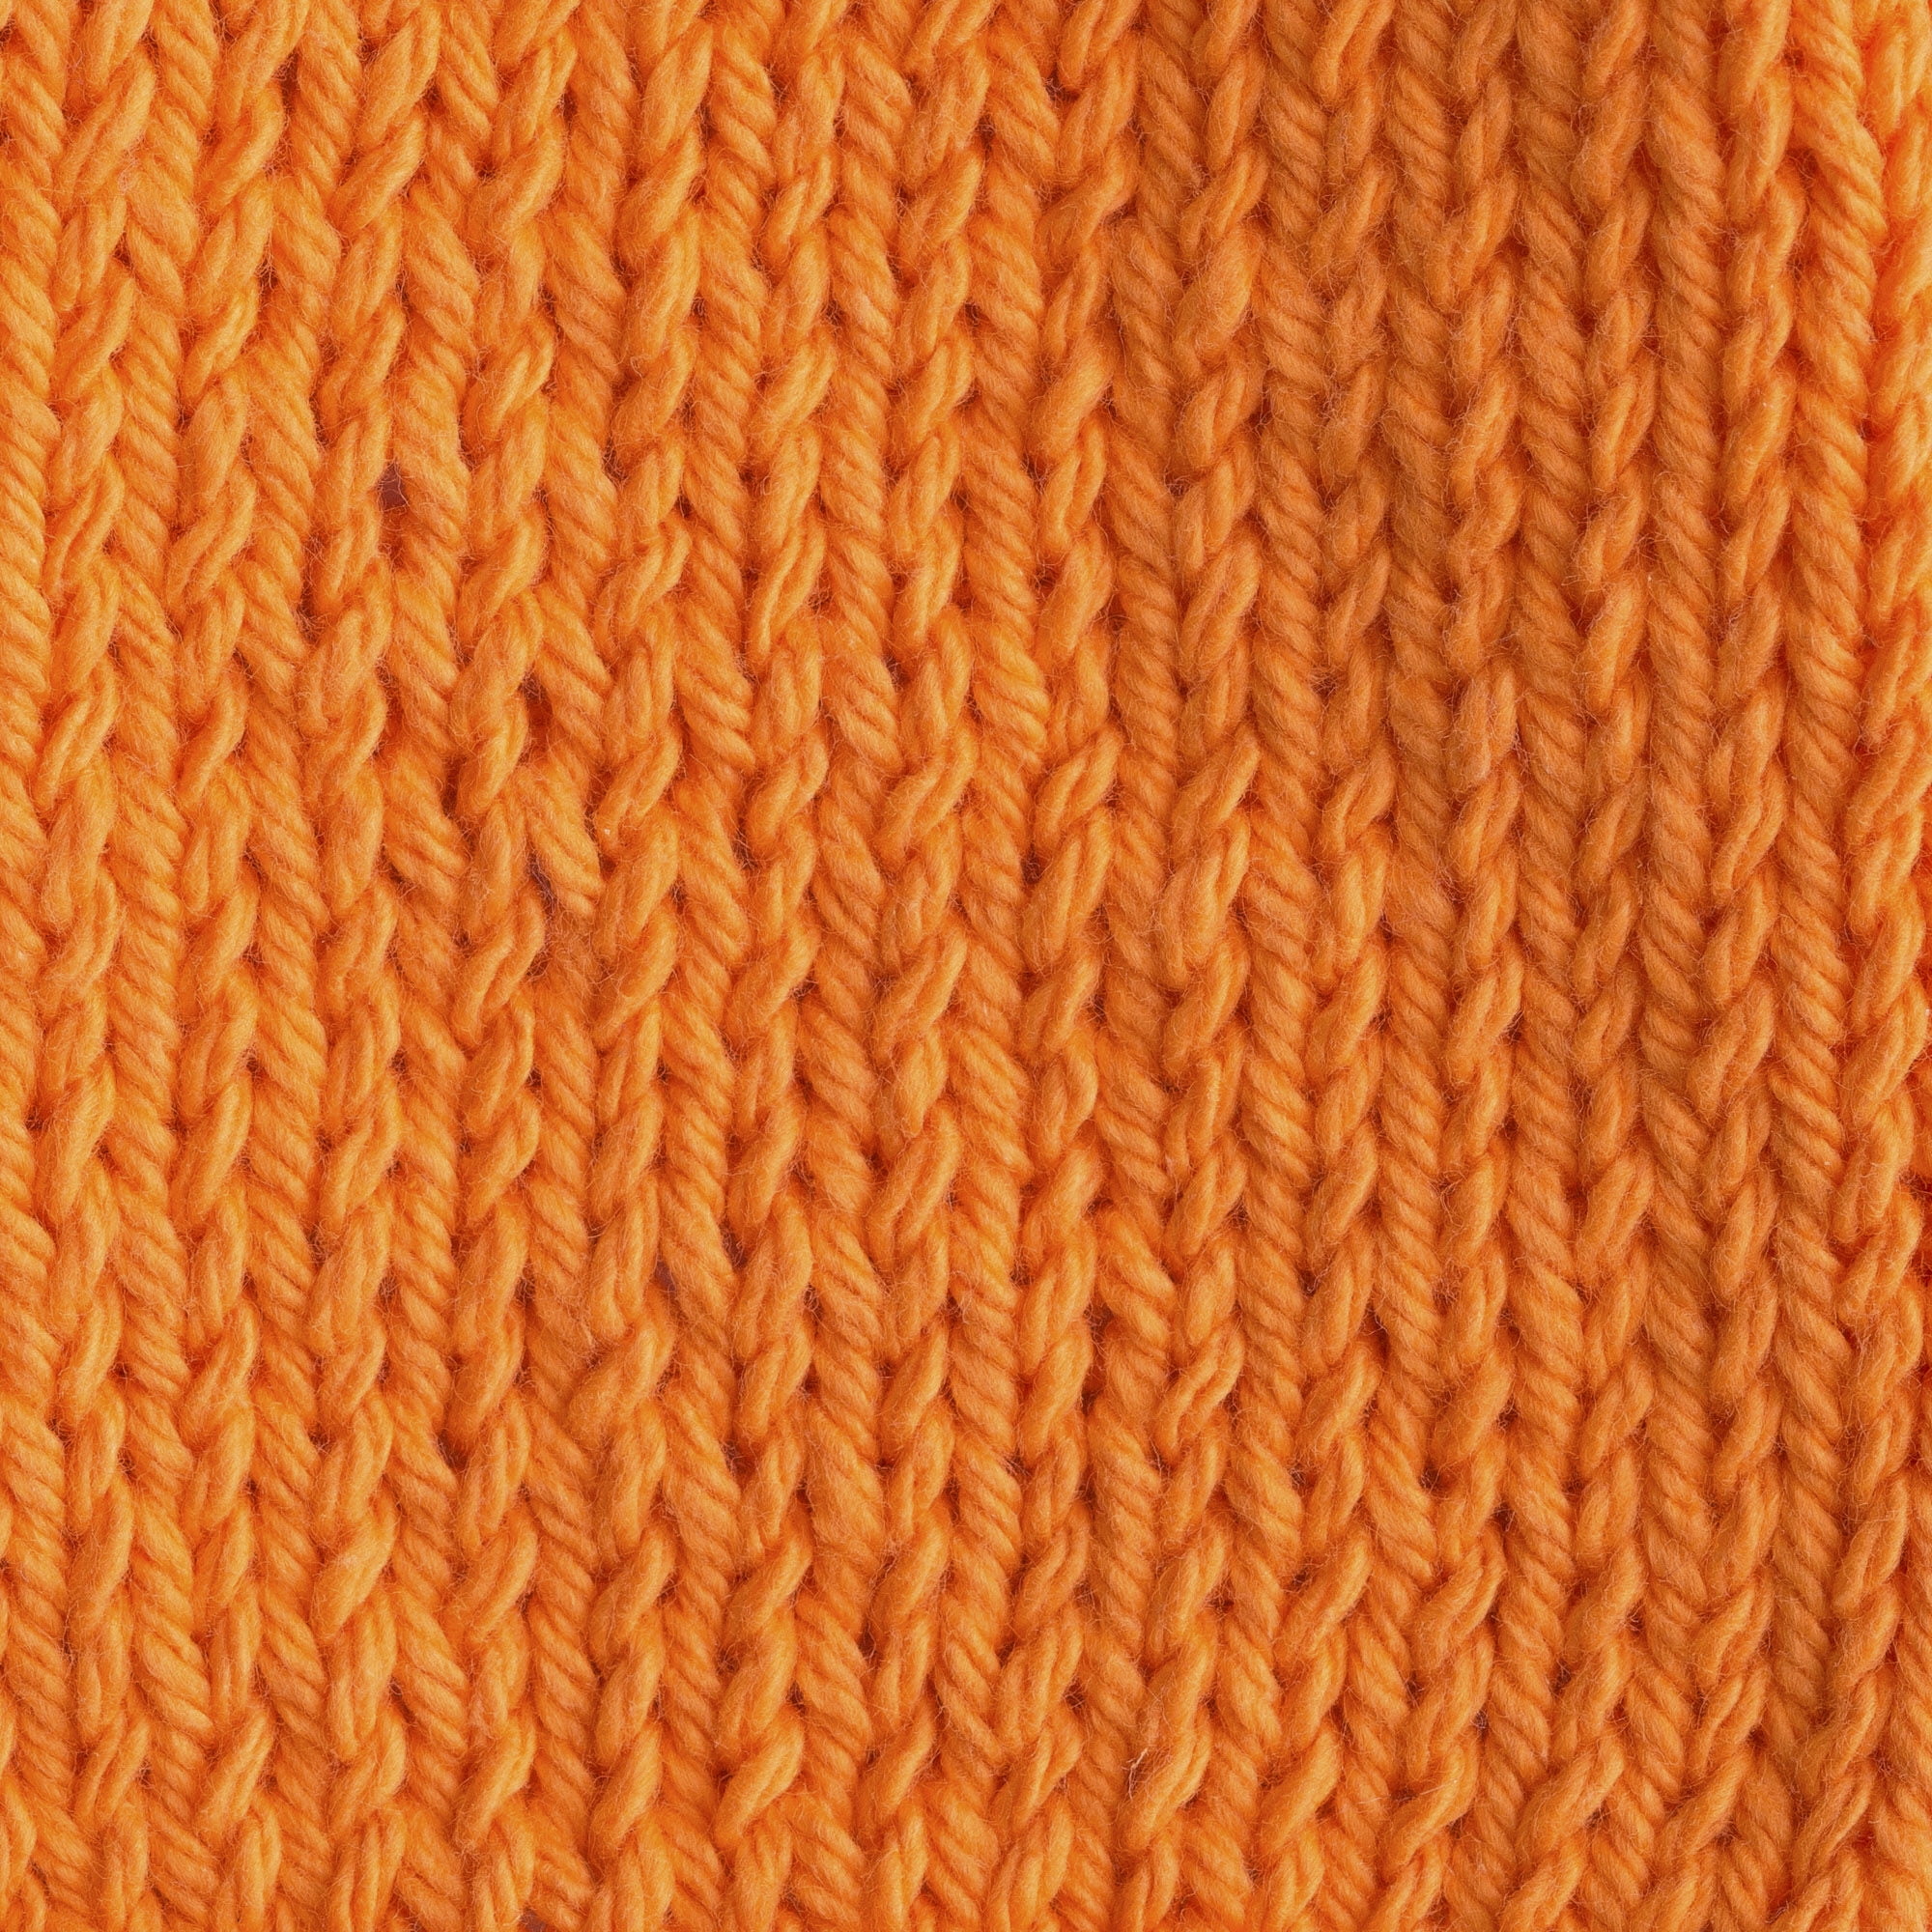 3x60g Orange Yarn for Crocheting and Knitting;3x66m (72yds) Cotton Yarn for  Beginners with Easy-to-See Stitches;Worsted-Weight Medium #4;Cotton-Nylon